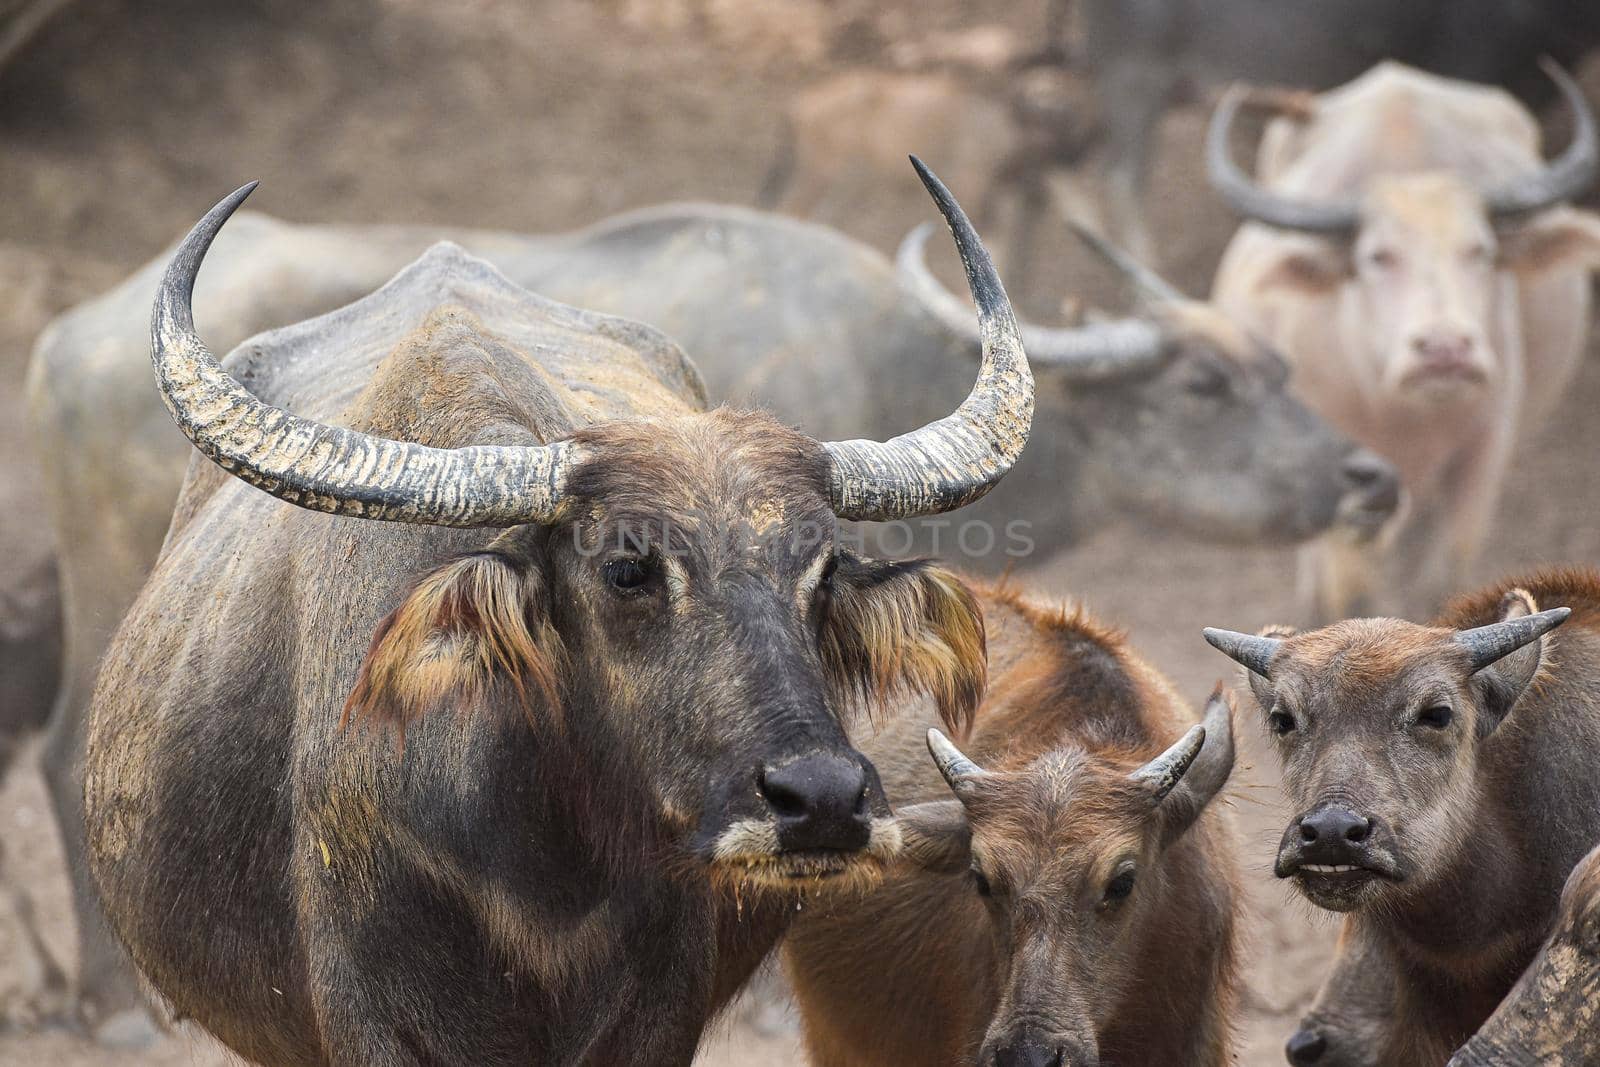  close up image of Water Buffalo  by NuwatPhoto